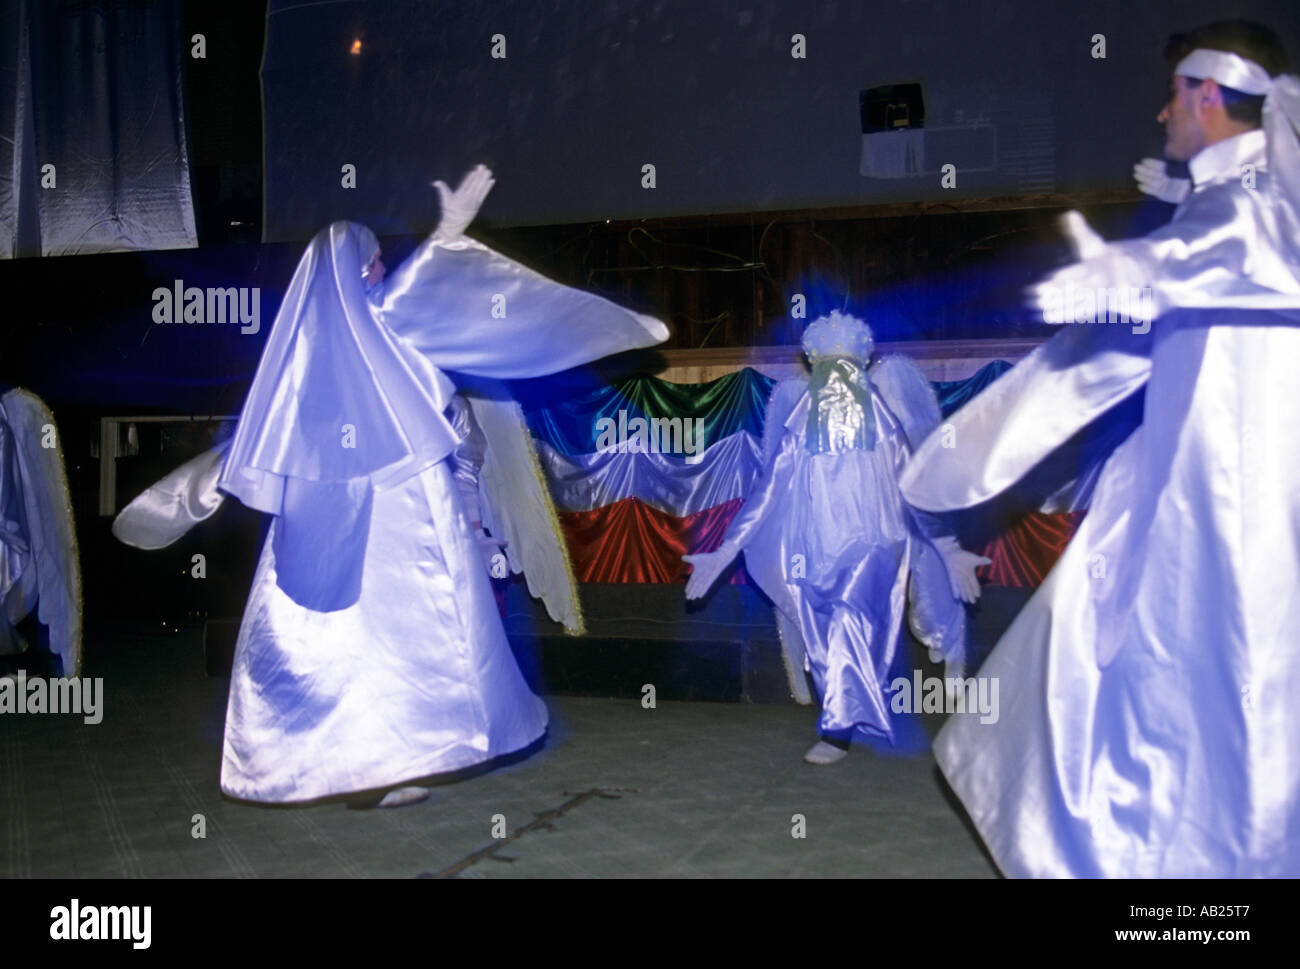 Entertainment show by dancers in white at mass wedding, Tehran, Iran Stock Photo